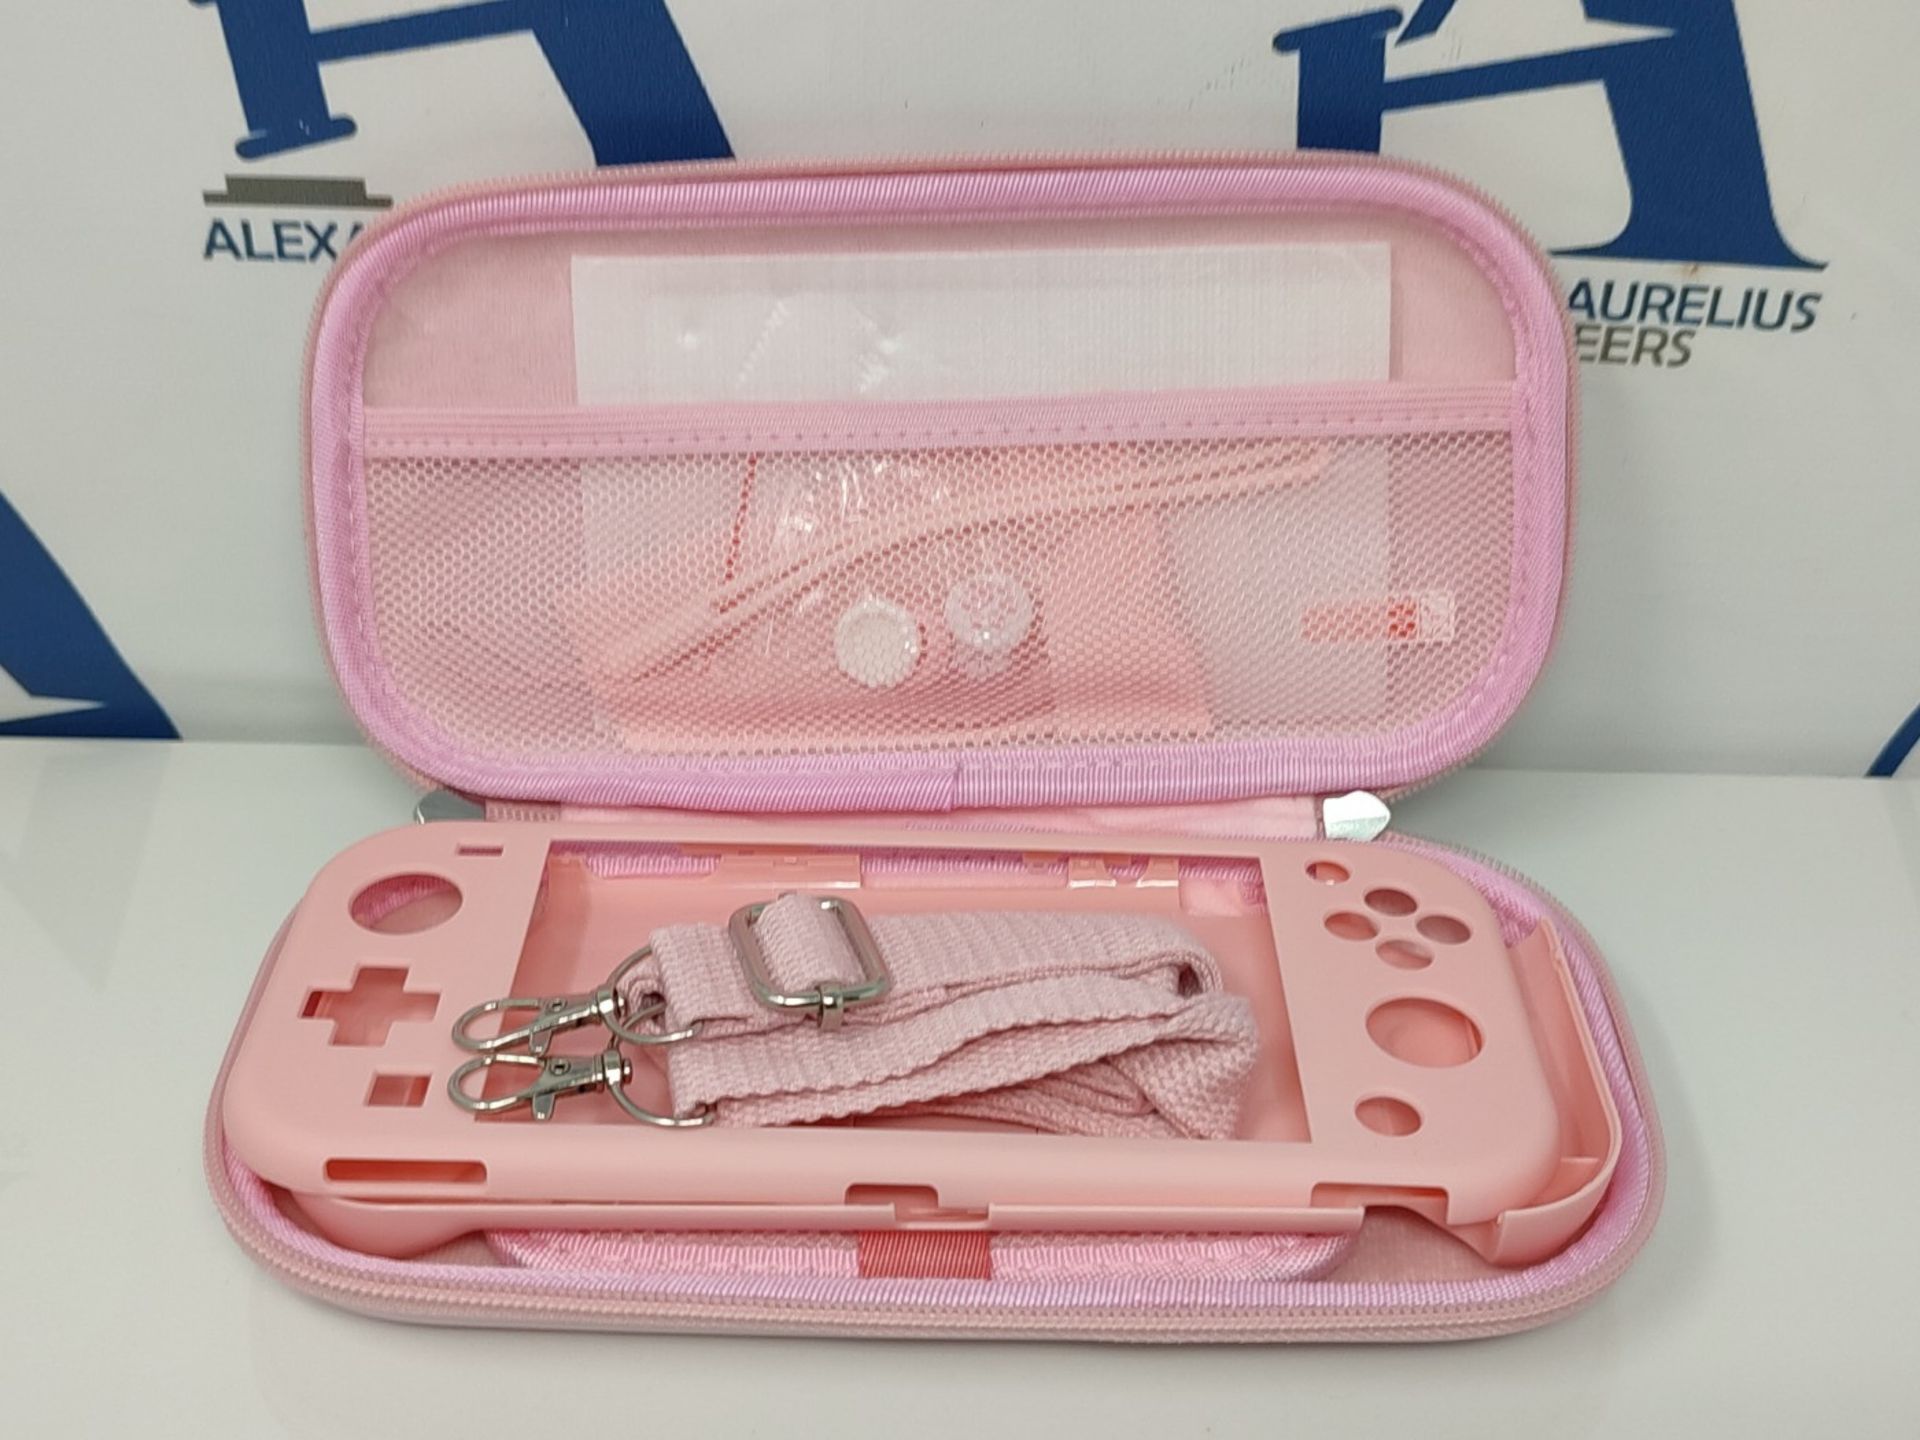 BRHE Pink Travel Carrying Case Accessories Kit for Switch Lite, Hard Protective Cover - Image 2 of 2